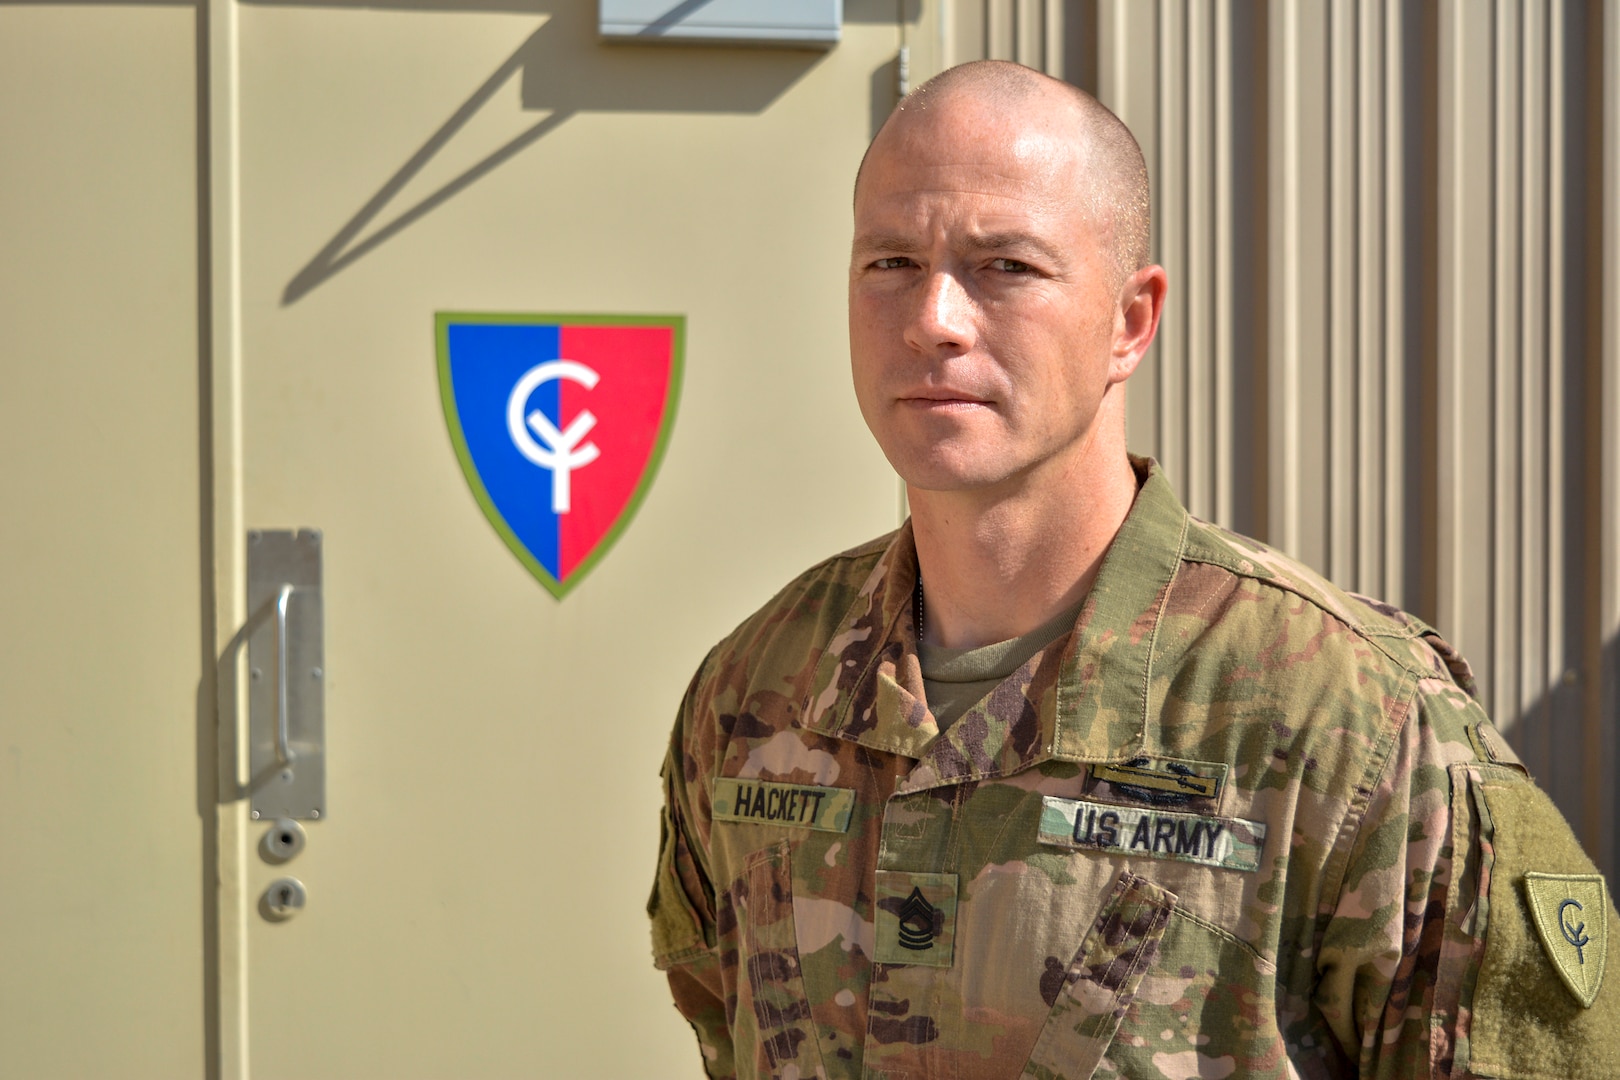 Indiana National Guard Master Sgt. Zachery Hackett, a 38th Infantry Division senior infantry sergeant from Fort Wayne, Indiana, serving as the unit’s future operations noncommissioned officer in charge, poses for a photo, Friday, Jan. 10, 2020 in the Middle East. Hackett, one of more than 600 National Guard soldiers who departed the Hoosier State in May, helps support the U.S. Army Central’s Task Force Spartan in southwest Asia. "The biggest challenges we face are the management and planning of major events Task Force Spartan in a 15- to 45-day time frame," said Hackett. "This can be challenging because of the size of formations that fall under us." Photo by Sgt. 1st Class Darron Salzer